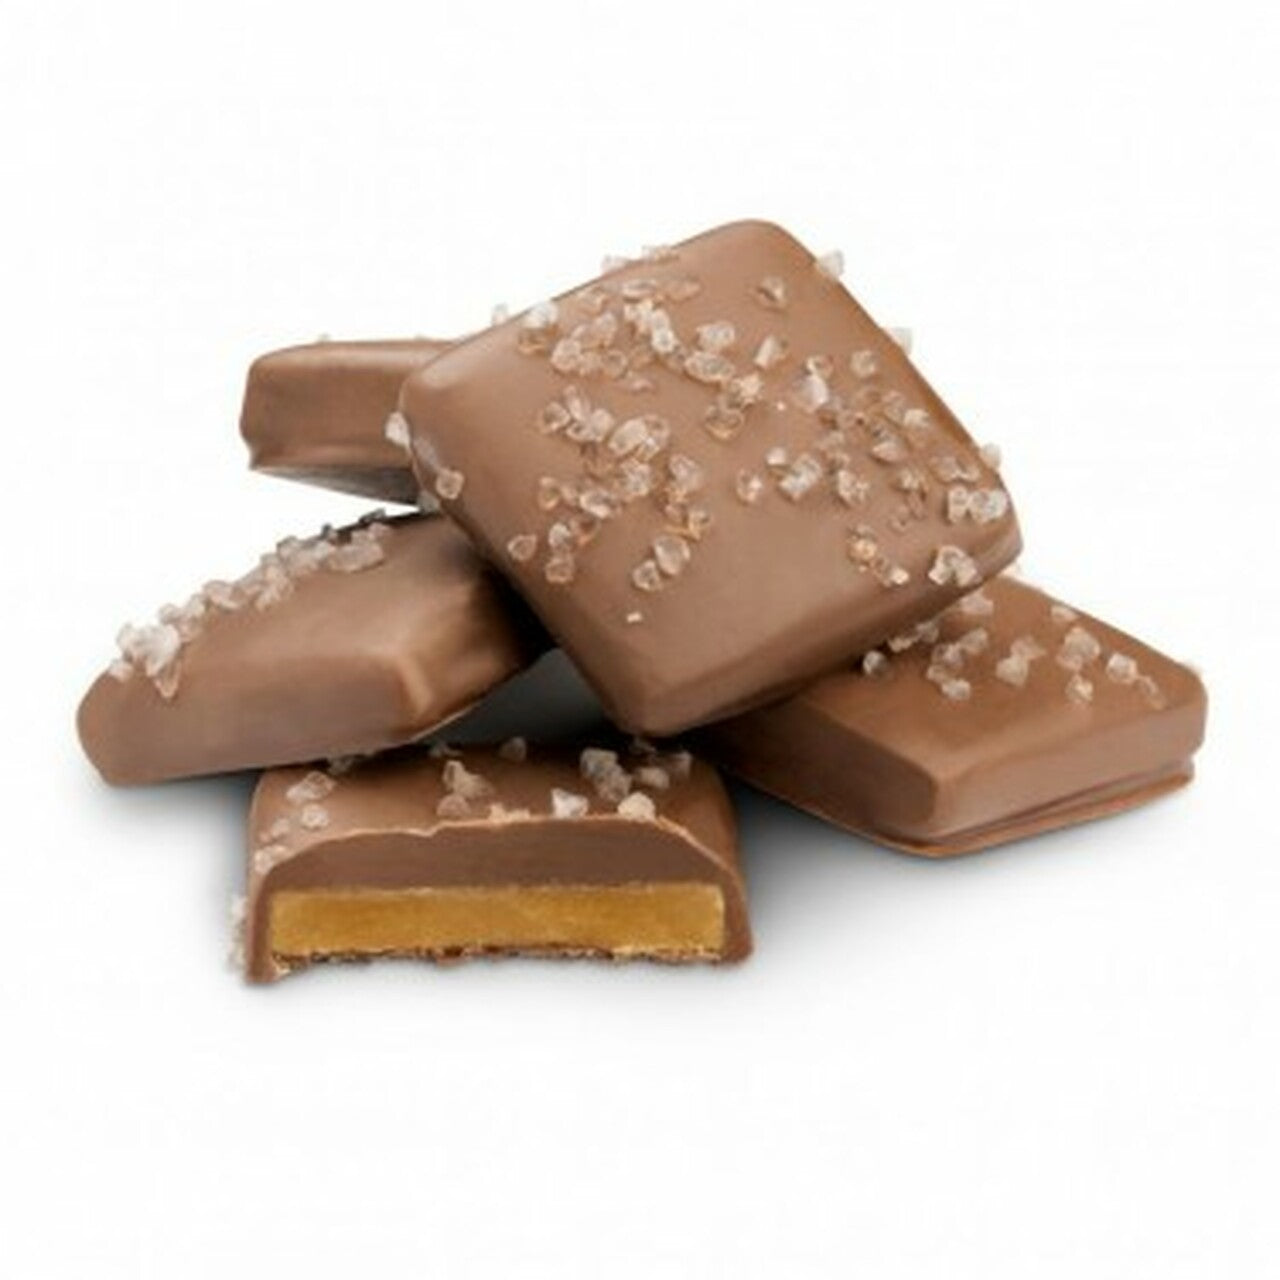 Milk chocolate toffee with sea salt from Stage Stop Candy